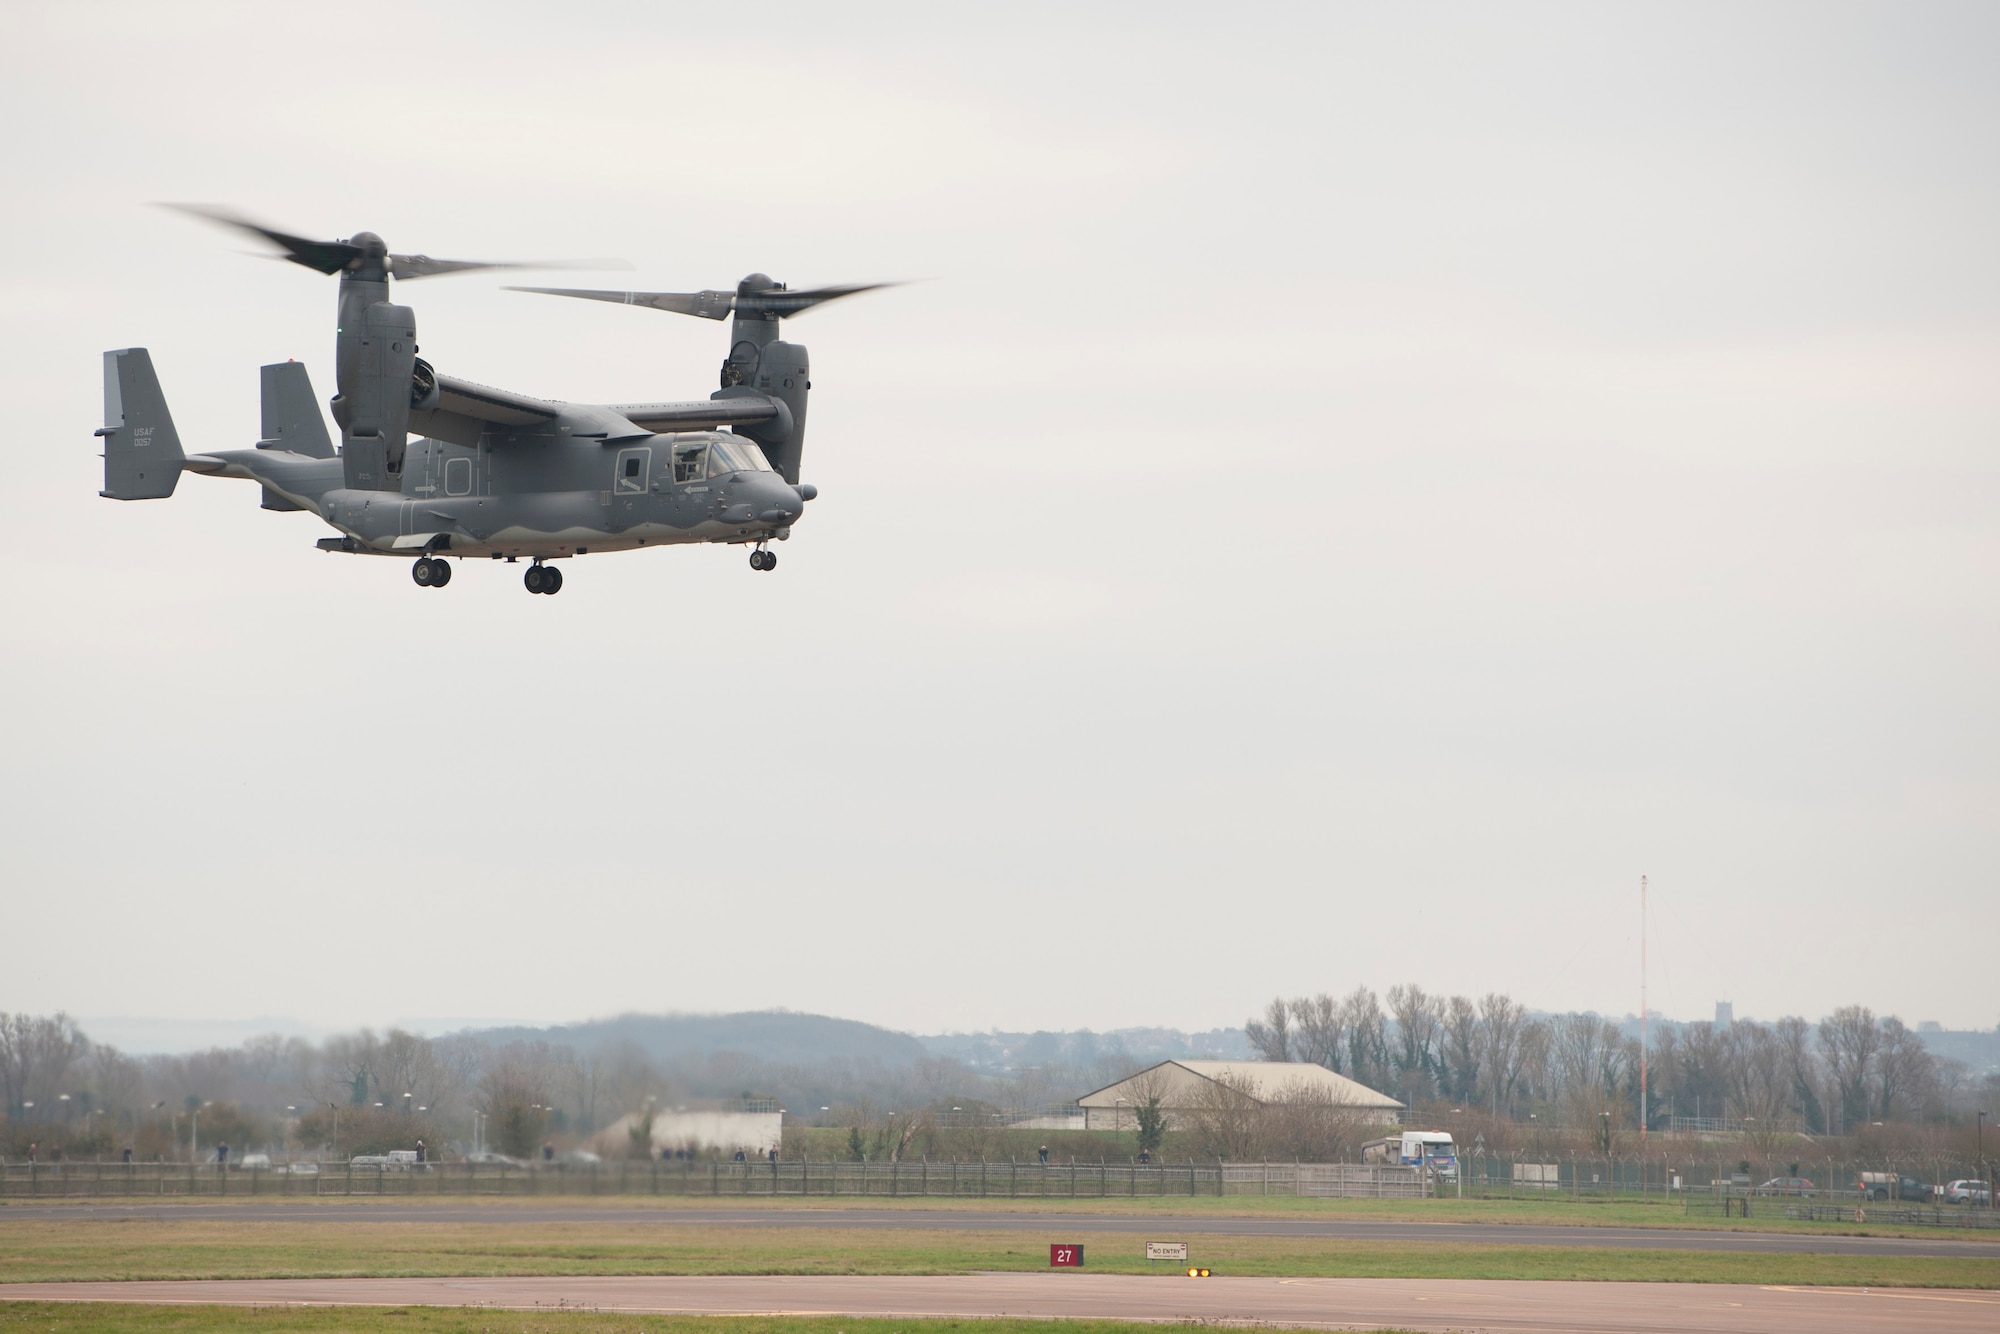 A CV-22 Osprey from the 7th Special Operations Squadron hovers during an exercise at RAF Fairford, England, Dec. 10, 2013. The 352nd Special Operations Group conducted an exercise involving approximately 130 Airmen and six aircraft at RAF Fairford from Dec. 9-12. The CV-22 Osprey is a tiltrotor aircraft that combines the vertical takeoff, hover and vertical landing capabilities of a helicopter with the long range, fuel efficiency and speed characteristics of a turboprop aircraft. (U.S. Air Force photo by Staff Sgt. Stephen Linch/Released)